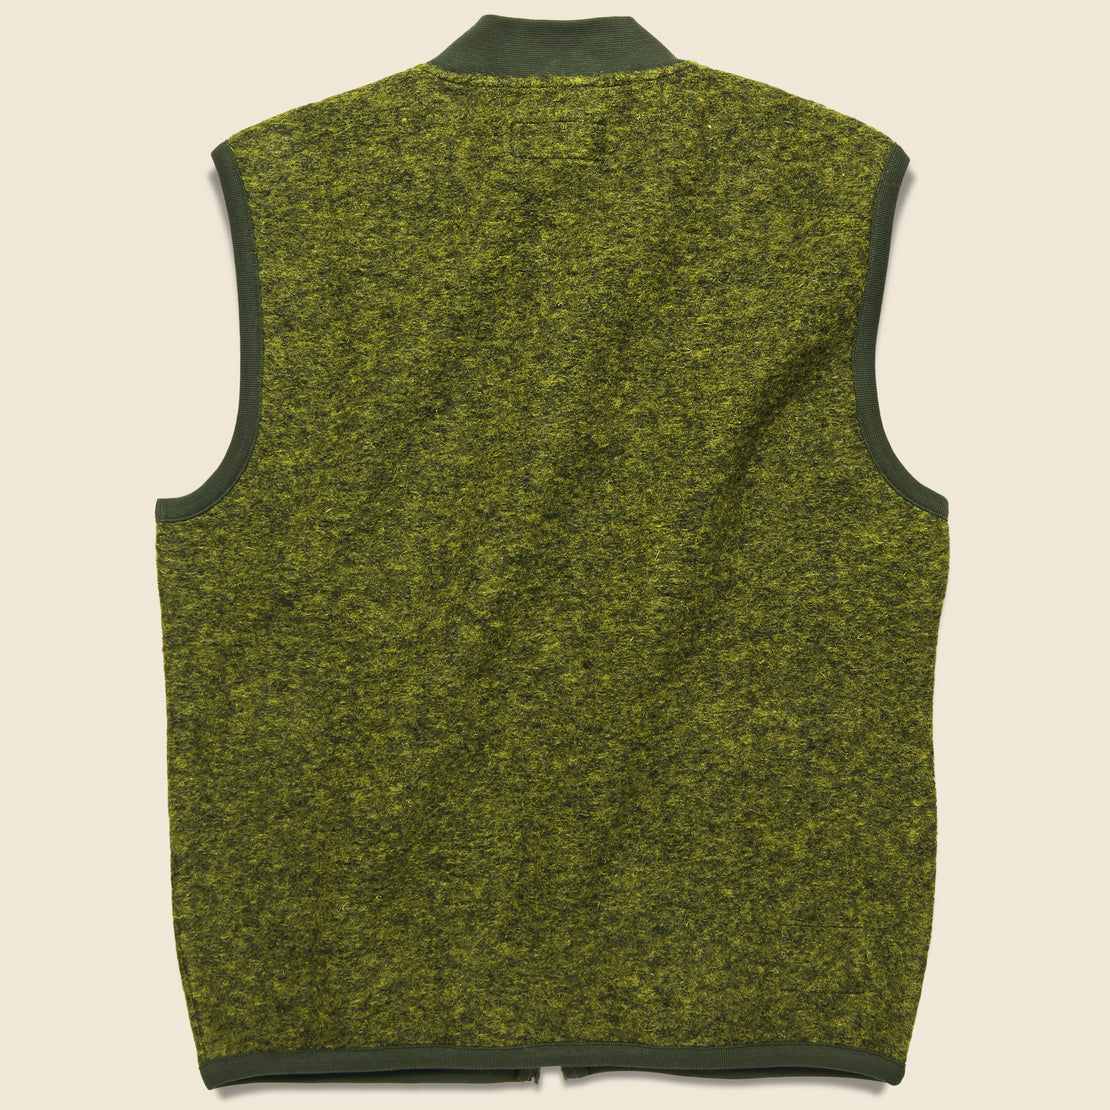 Wool Fleece Waistcoat - Green - Universal Works - STAG Provisions - Outerwear - Vest